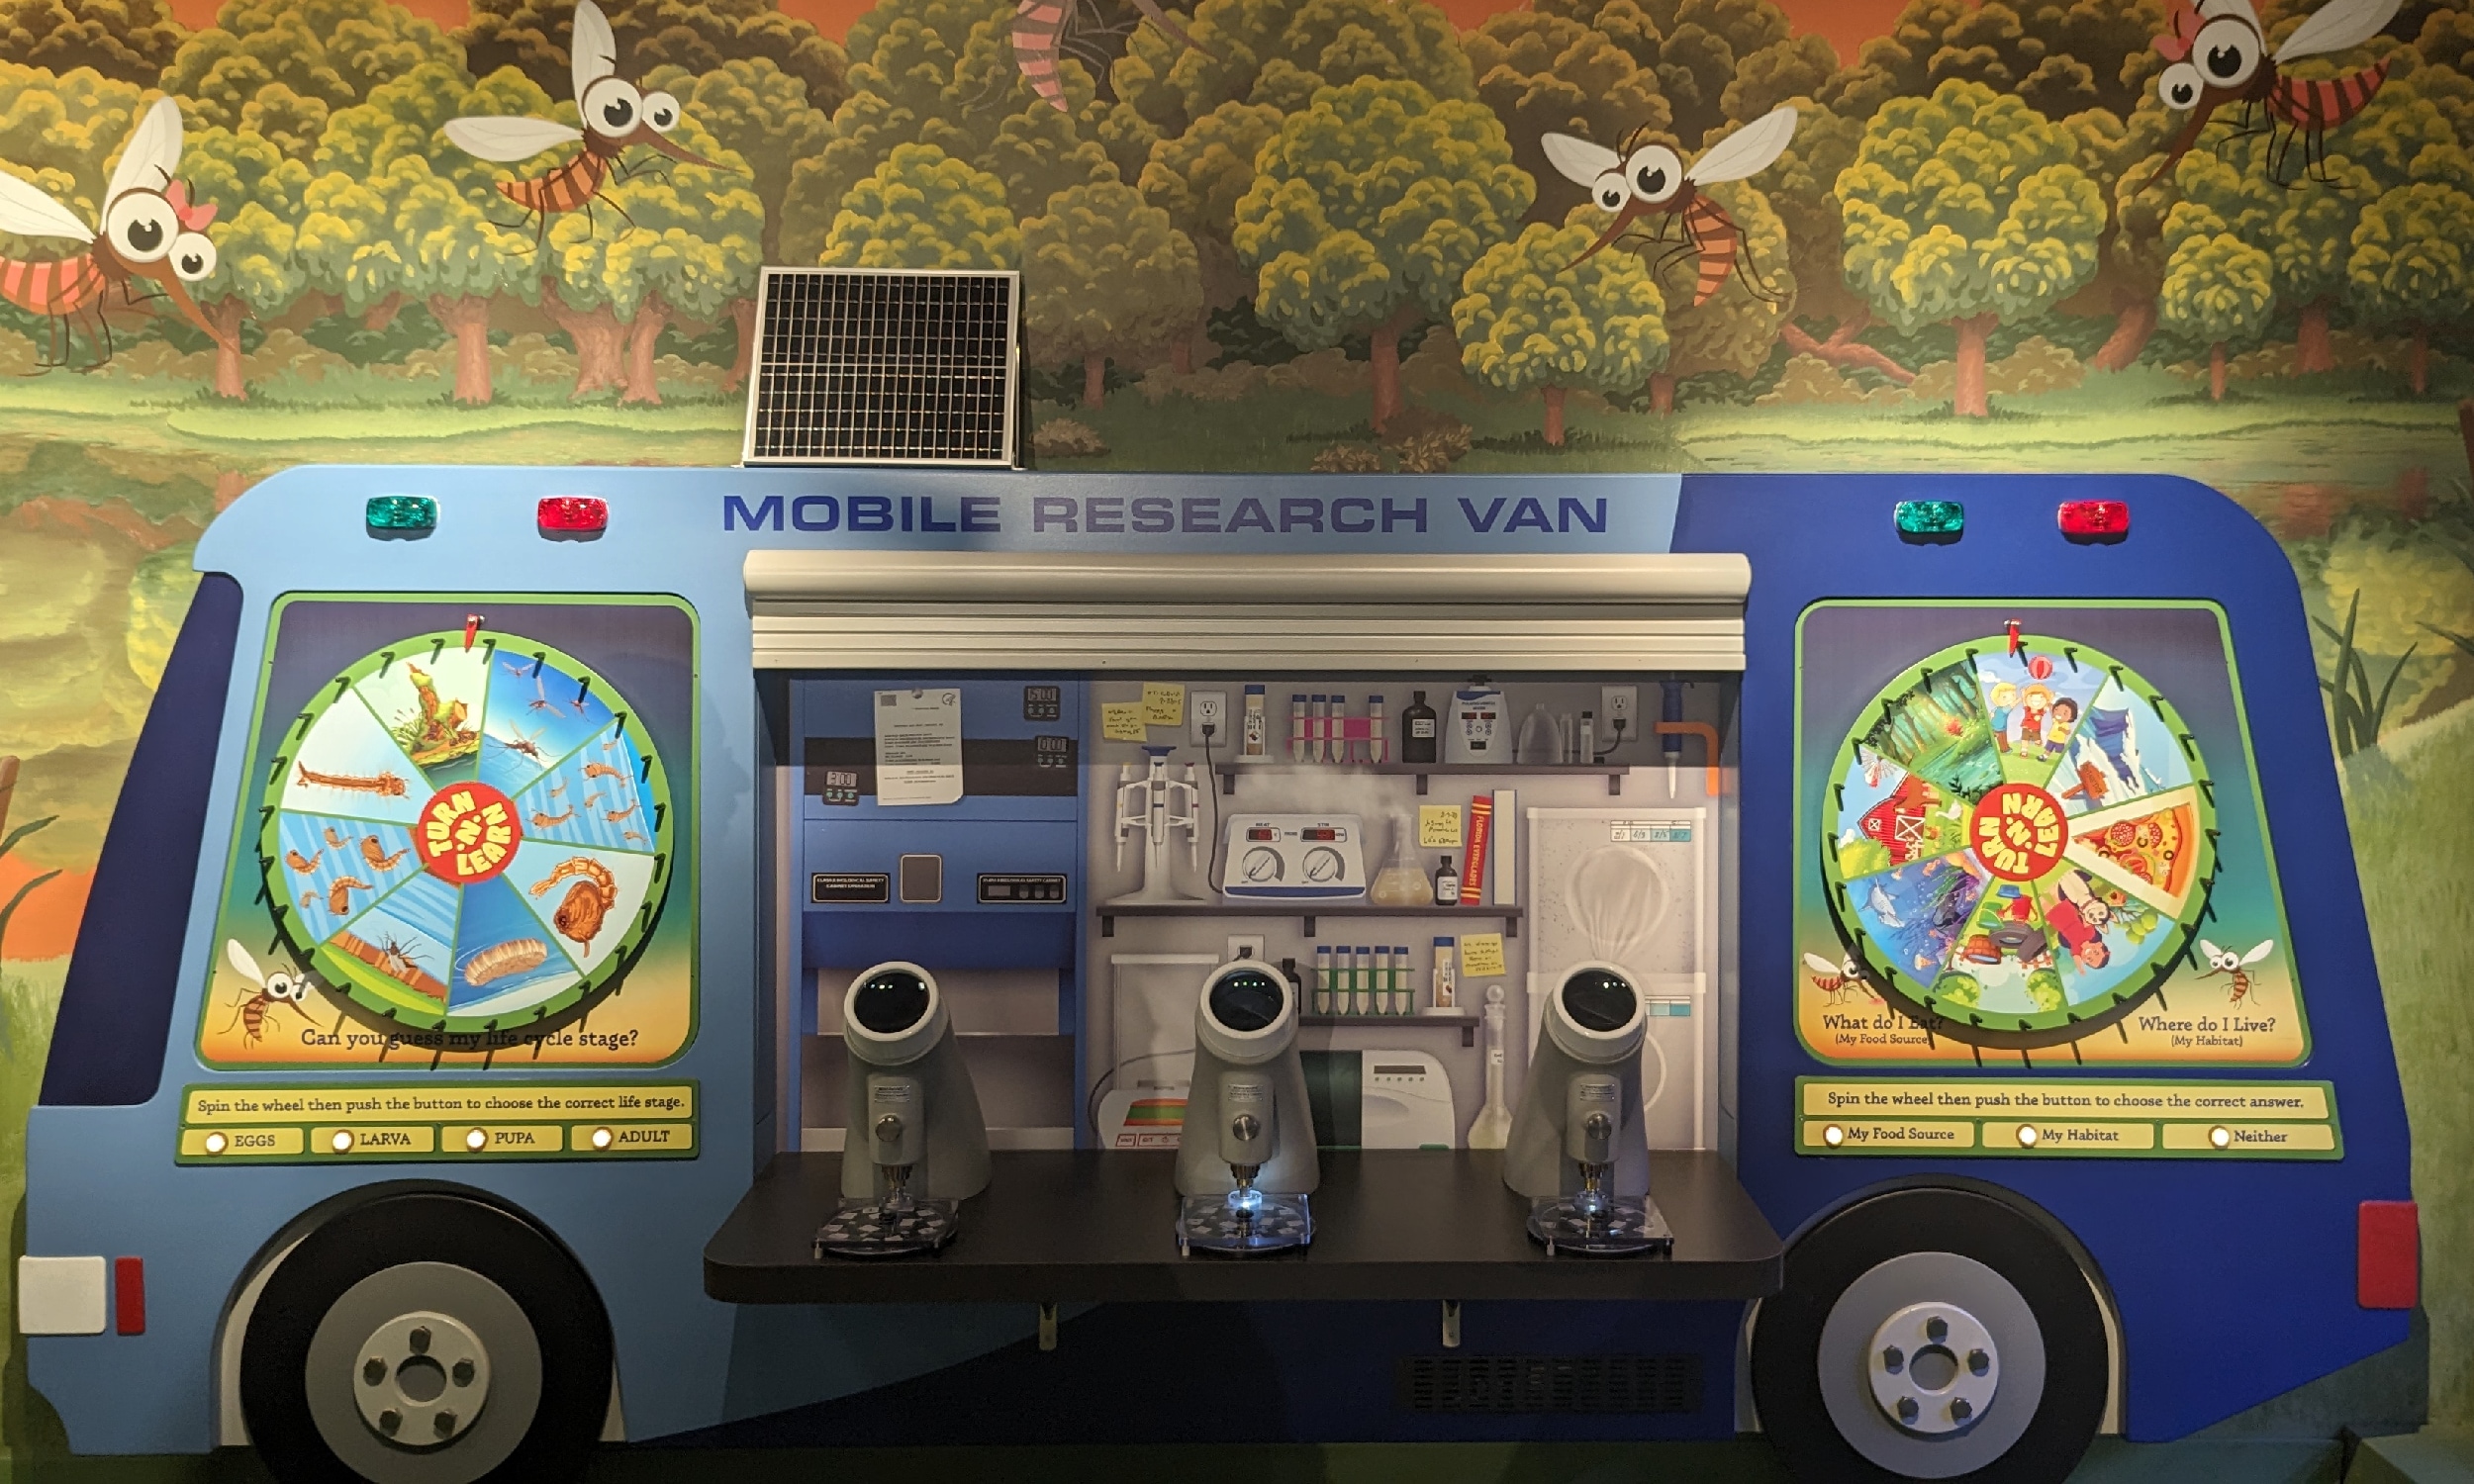 This exhibit helps kids learn how to protect an area from mosquitoes